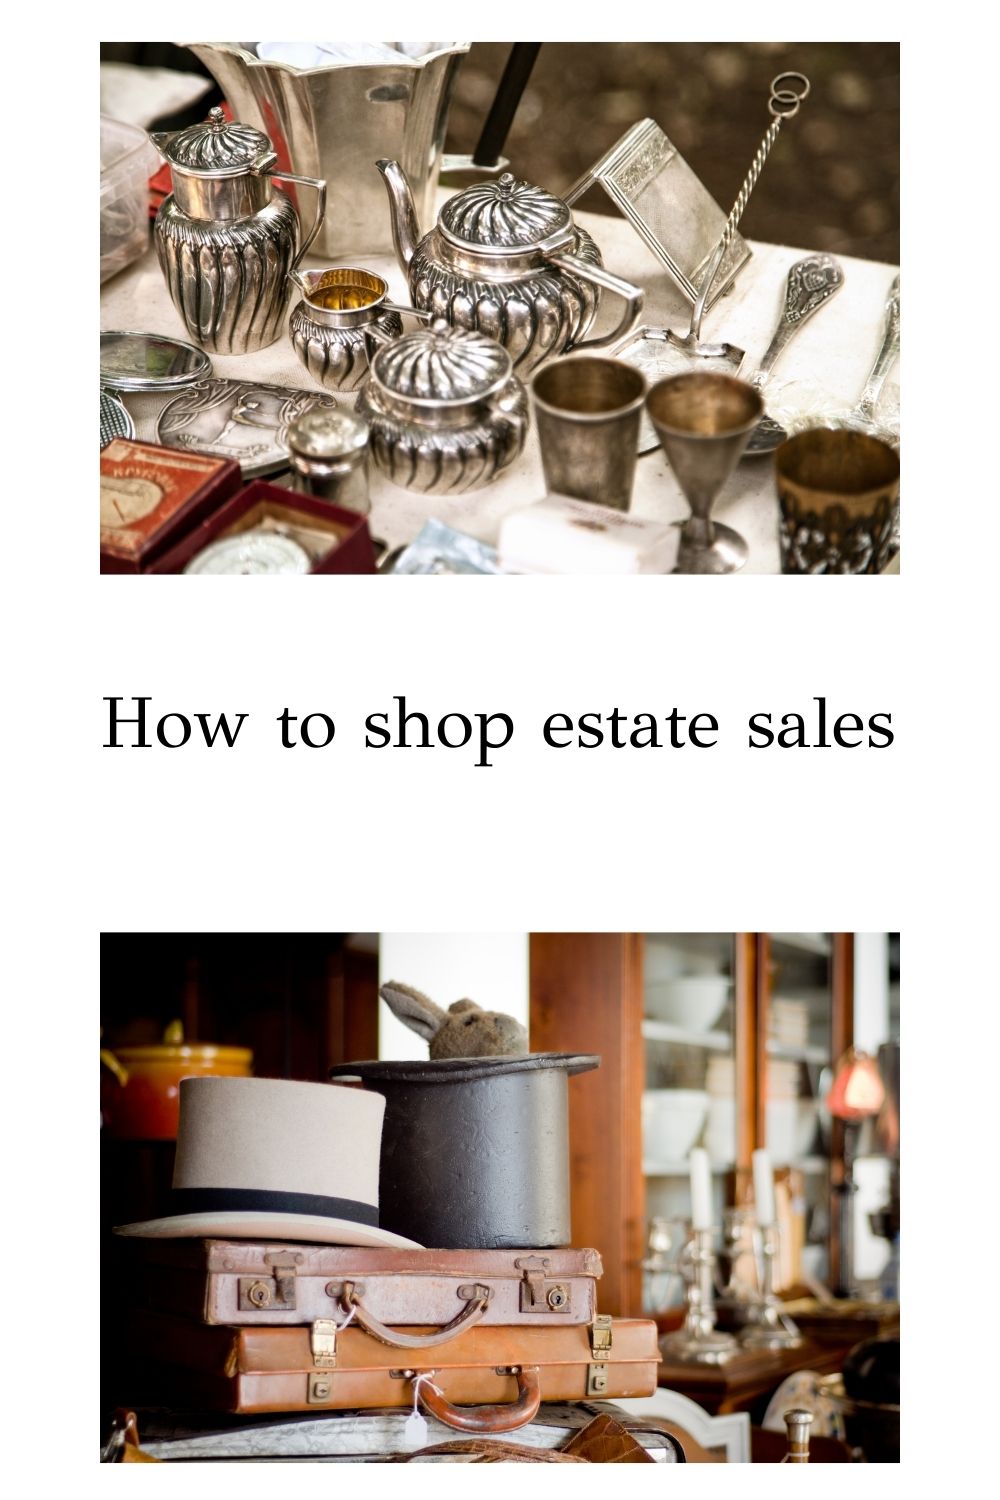 How to shop estate sales successfully